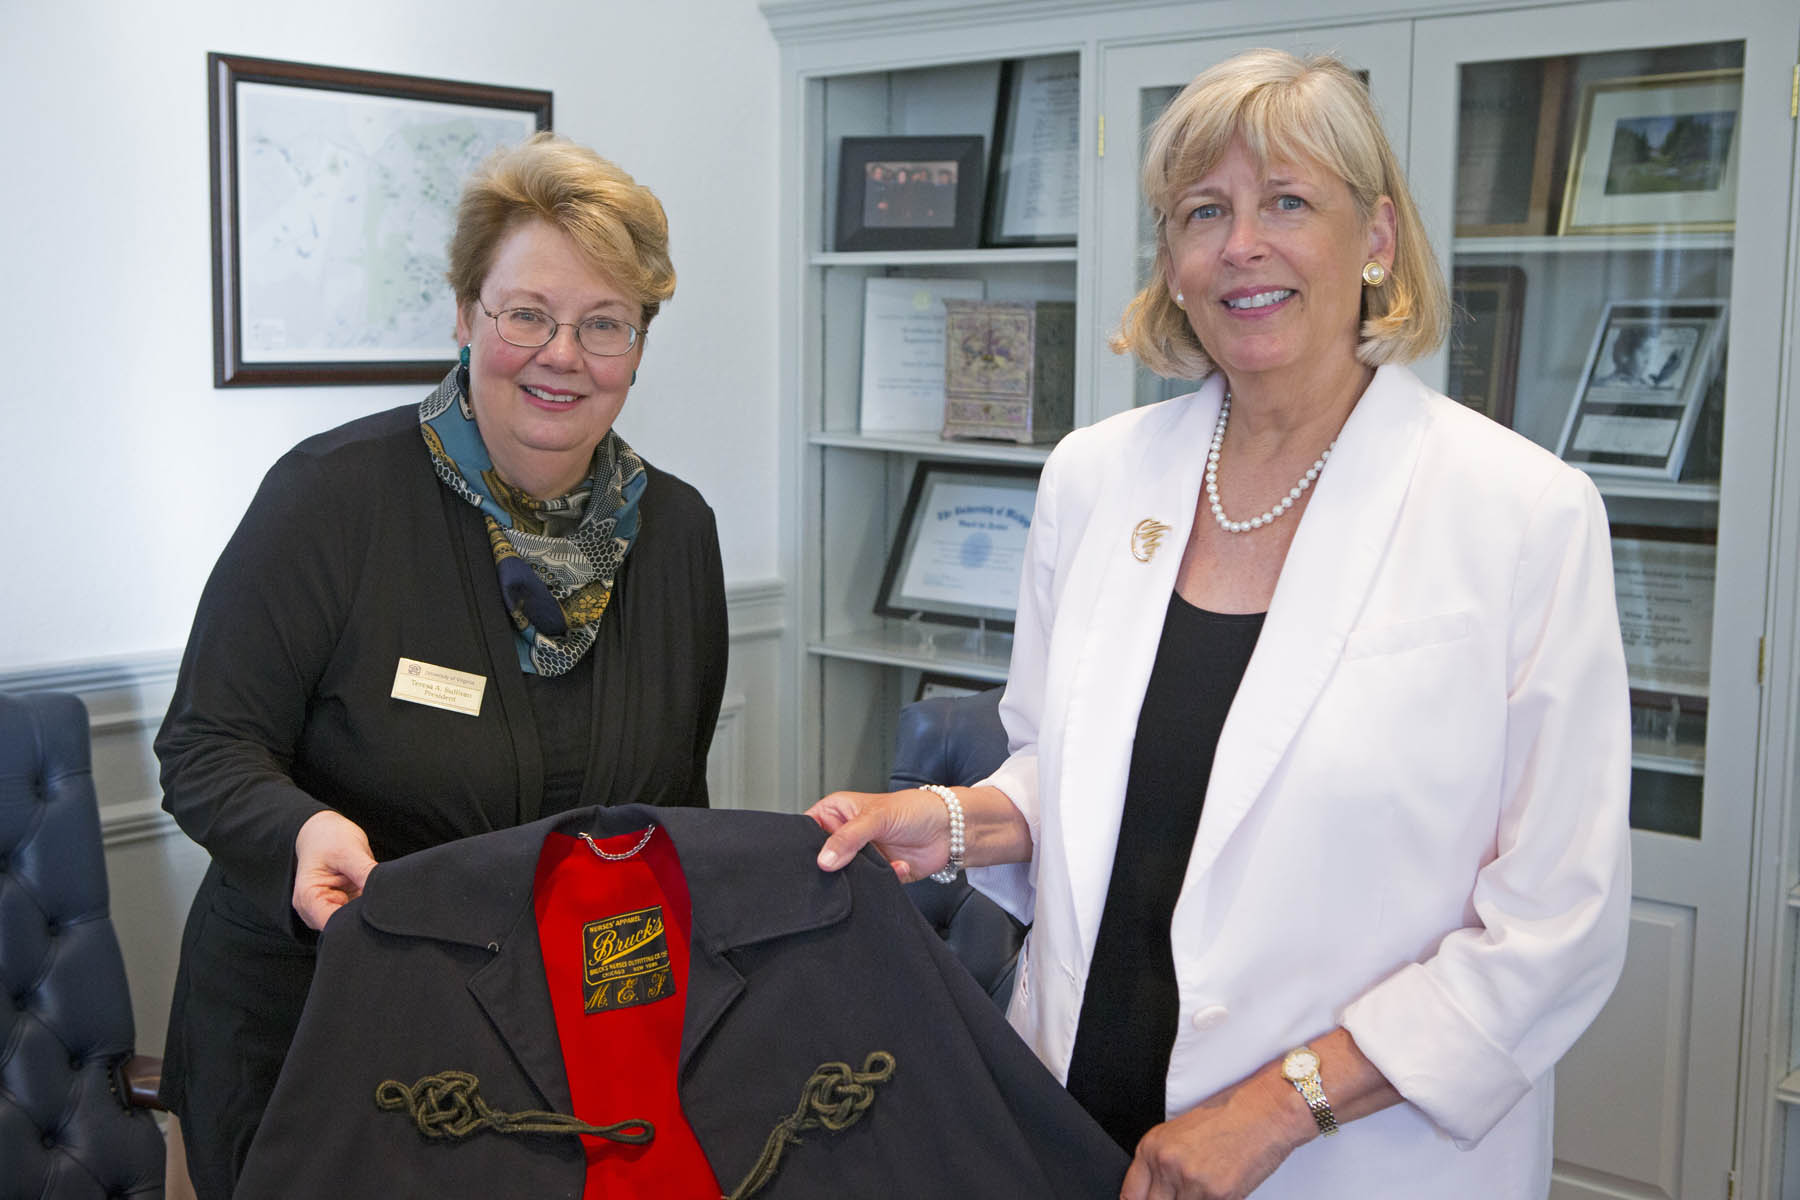 Teresa A. Sullivan, left, holding an old jacket with Dorrie Fontaine, right